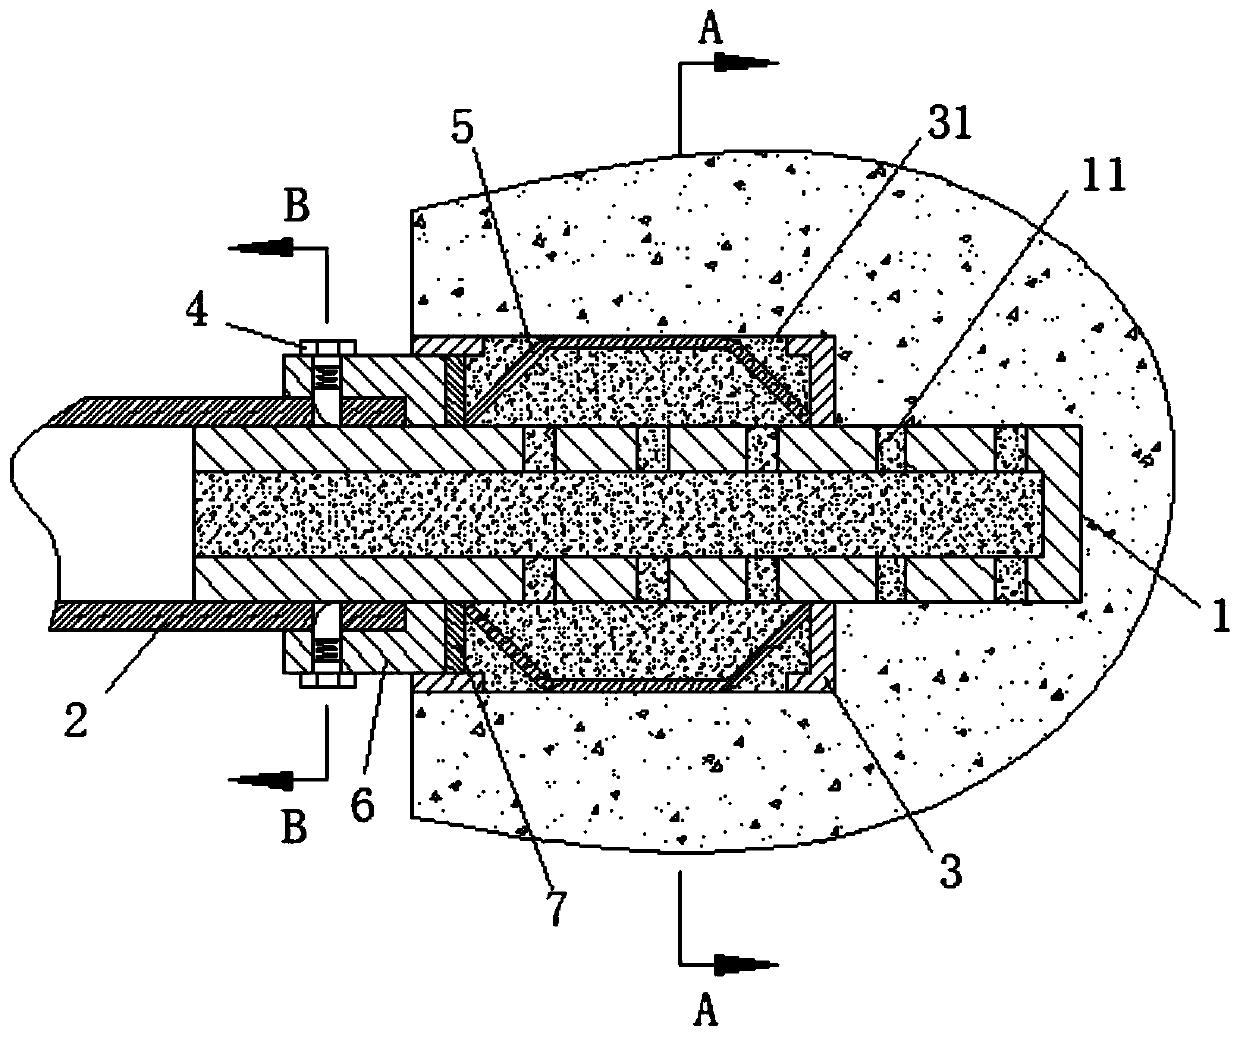 A connection structure and installation method of steel pipes for scaffolding